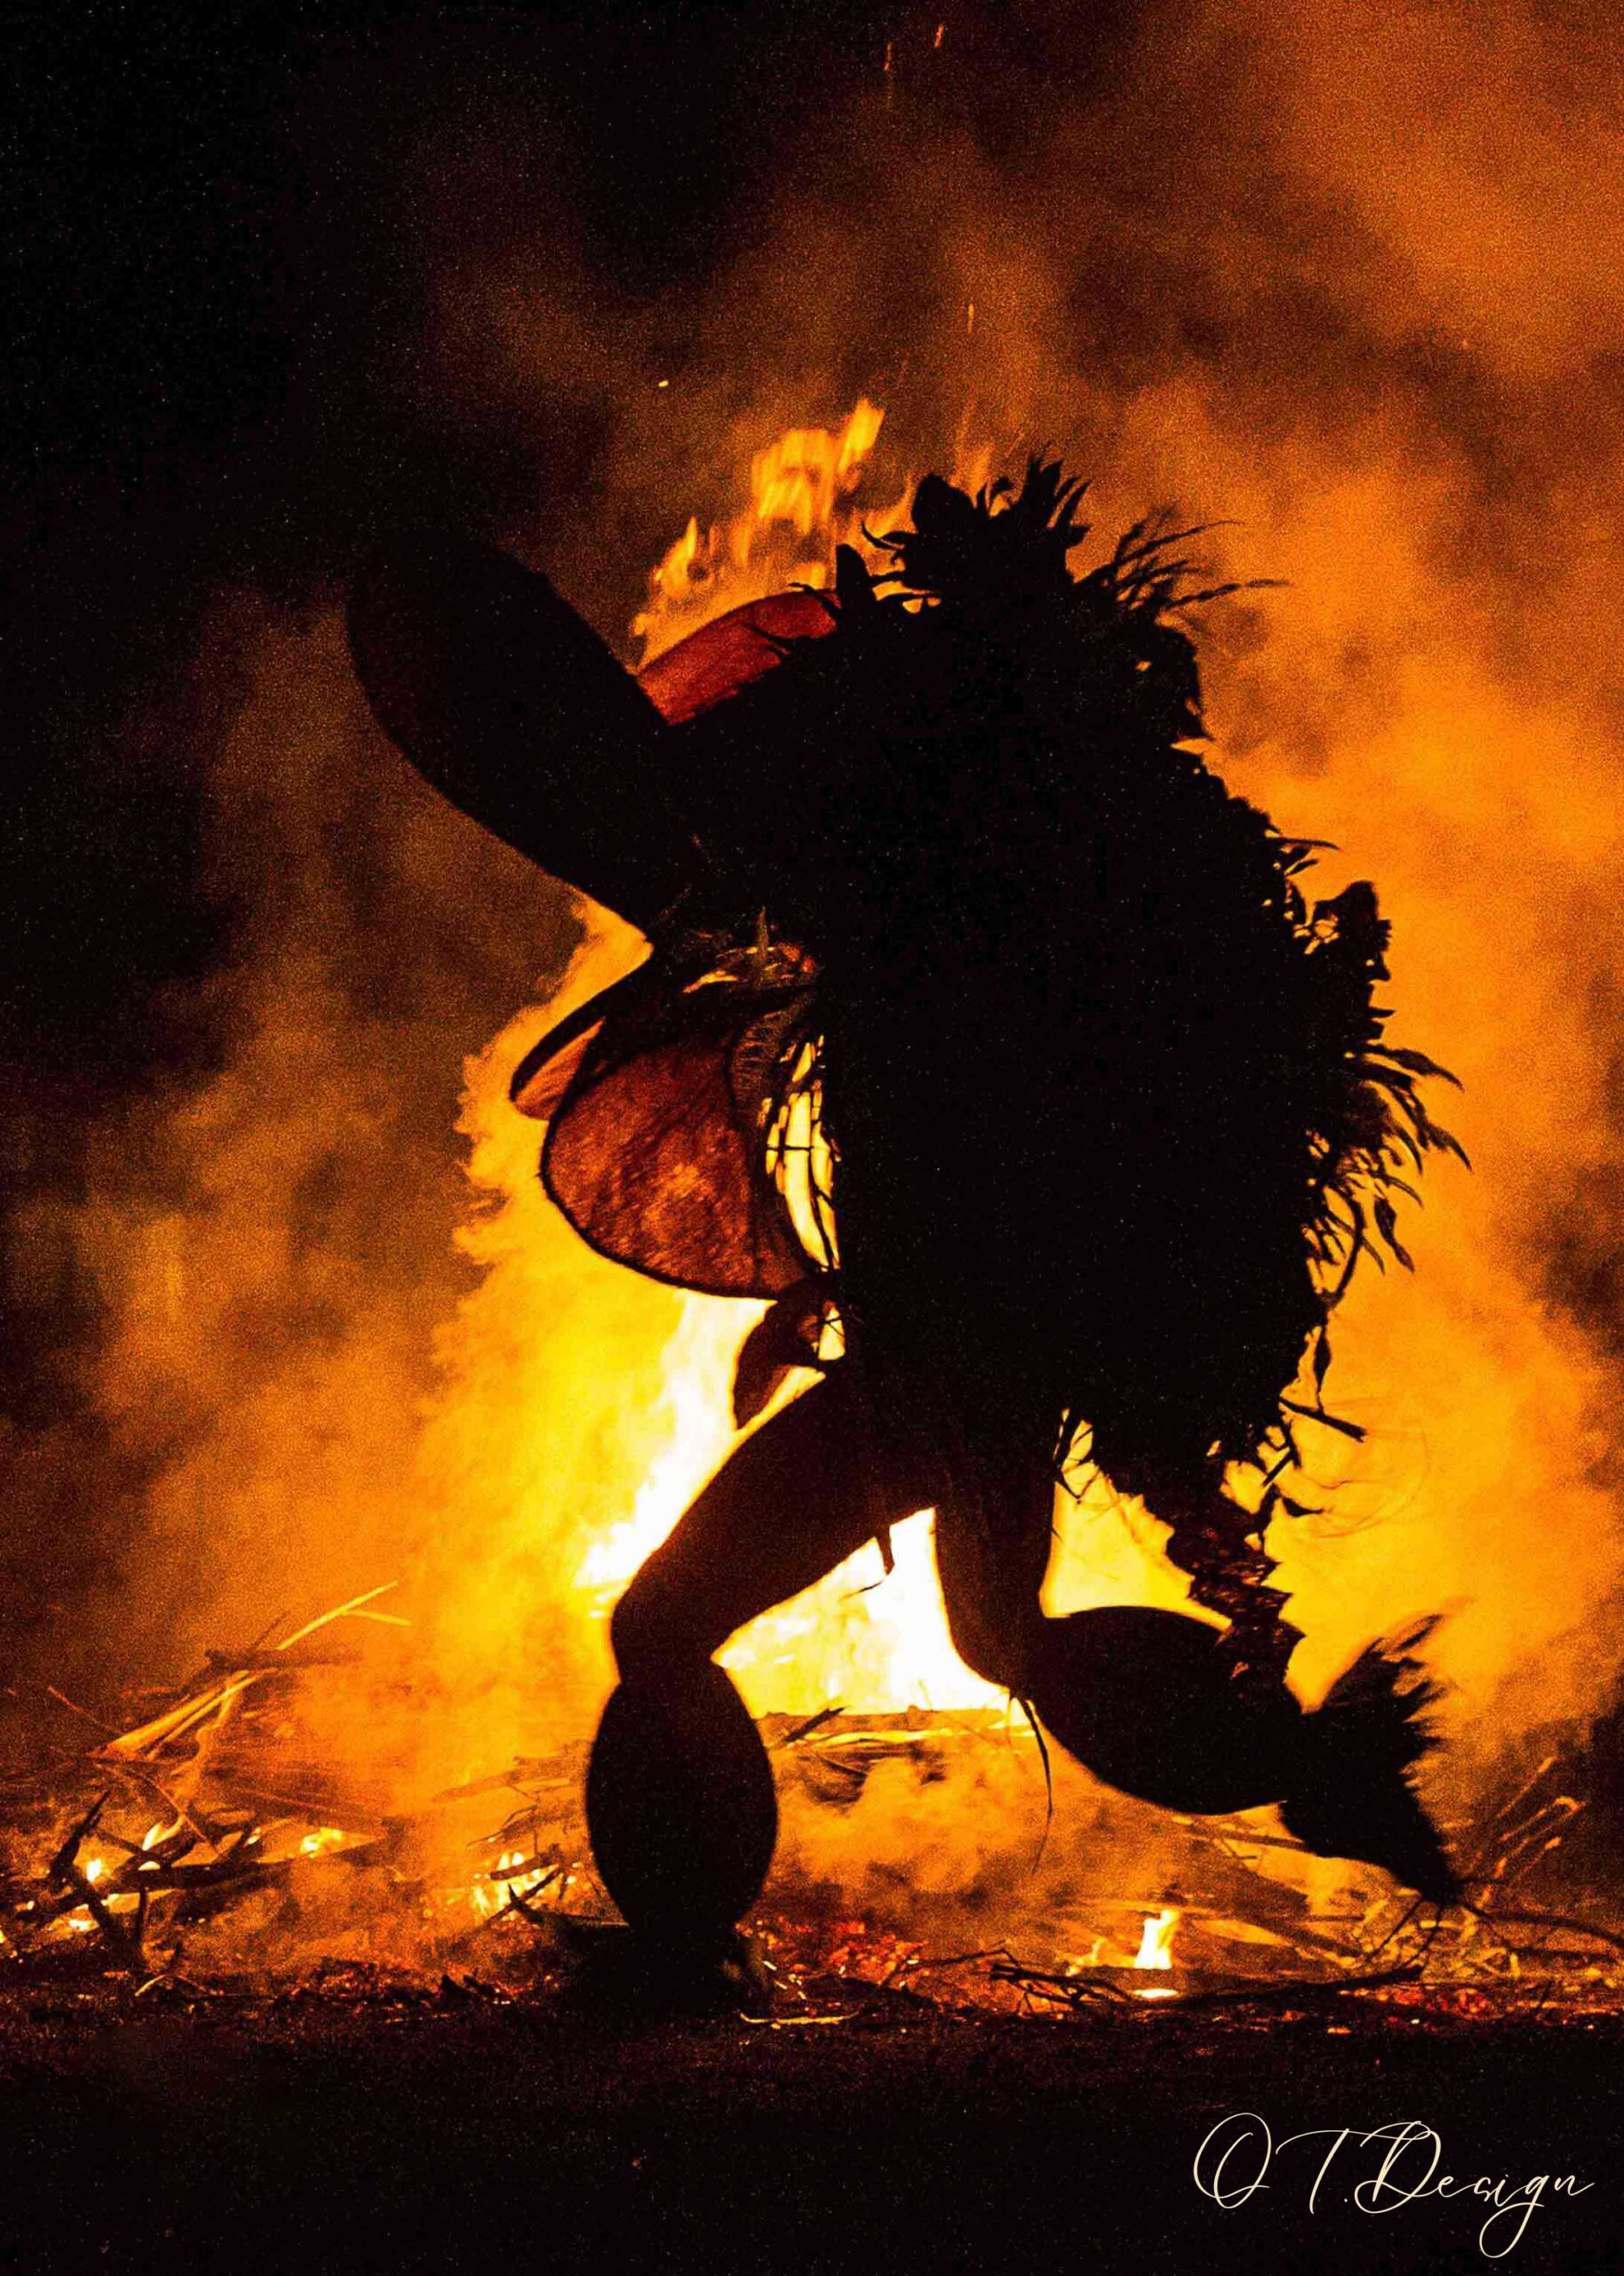 A young men crossing through fire in the "Sacred Baining Fire Dance" in Rabaul, Papua New Guinea